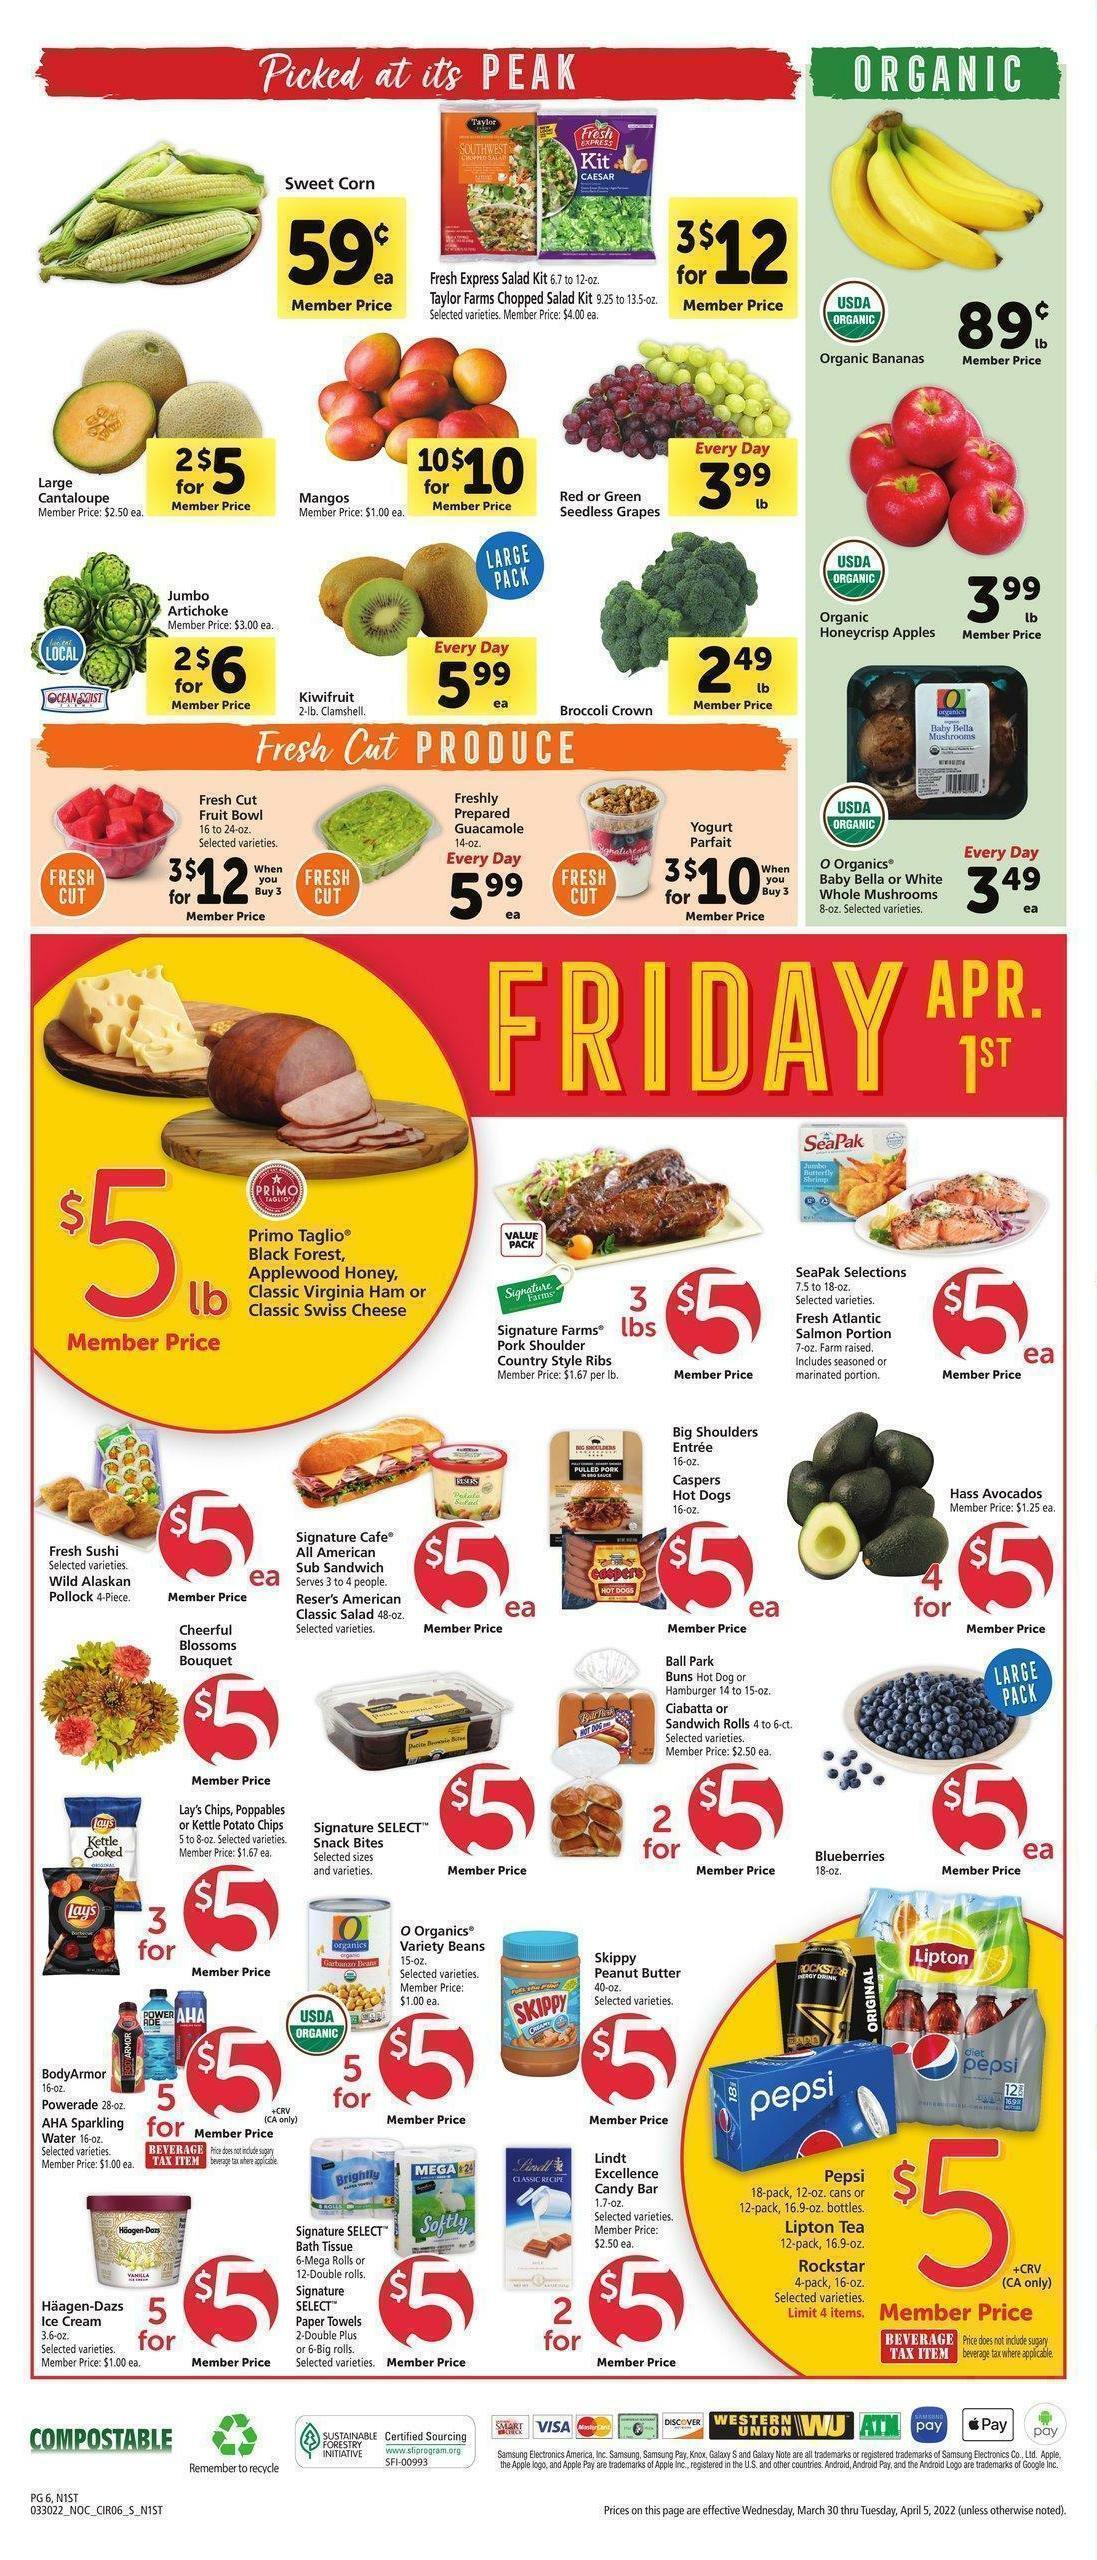 Safeway Weekly Ad from March 30